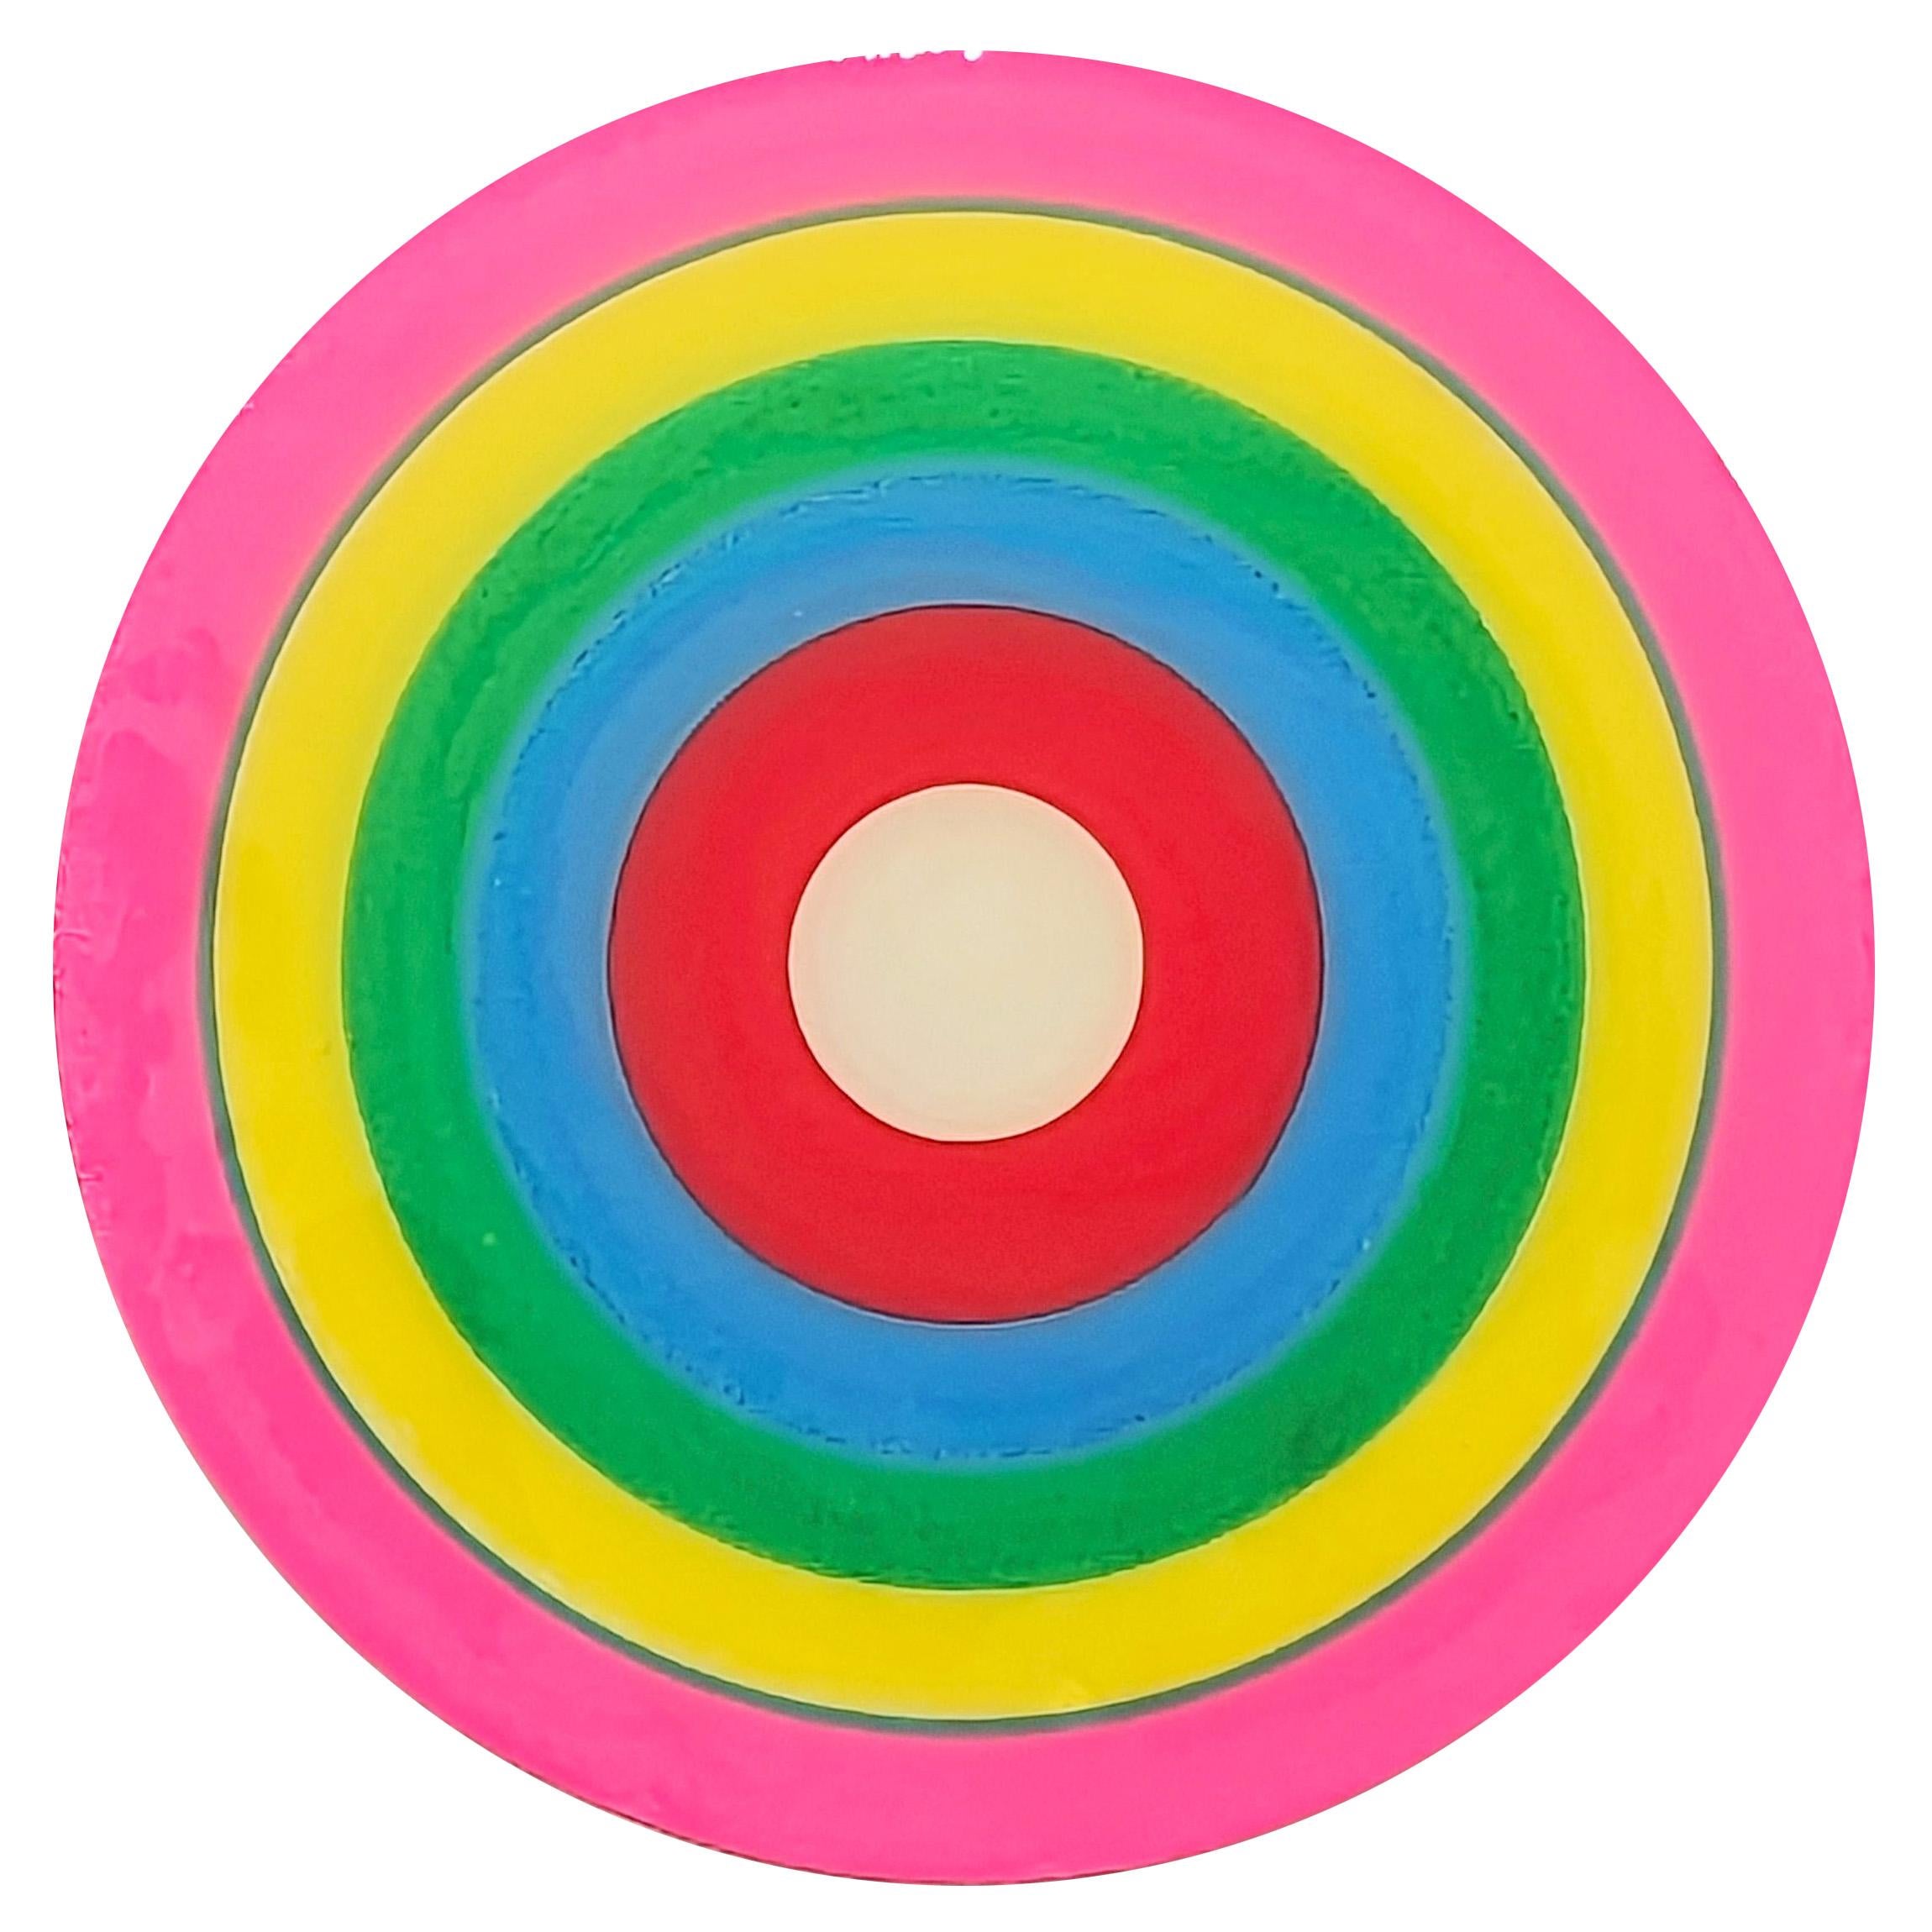 "Study for a Song 8" Contemporary Colorful Abstract Concentric Circle Painting - Mixed Media Art by David Hardaker